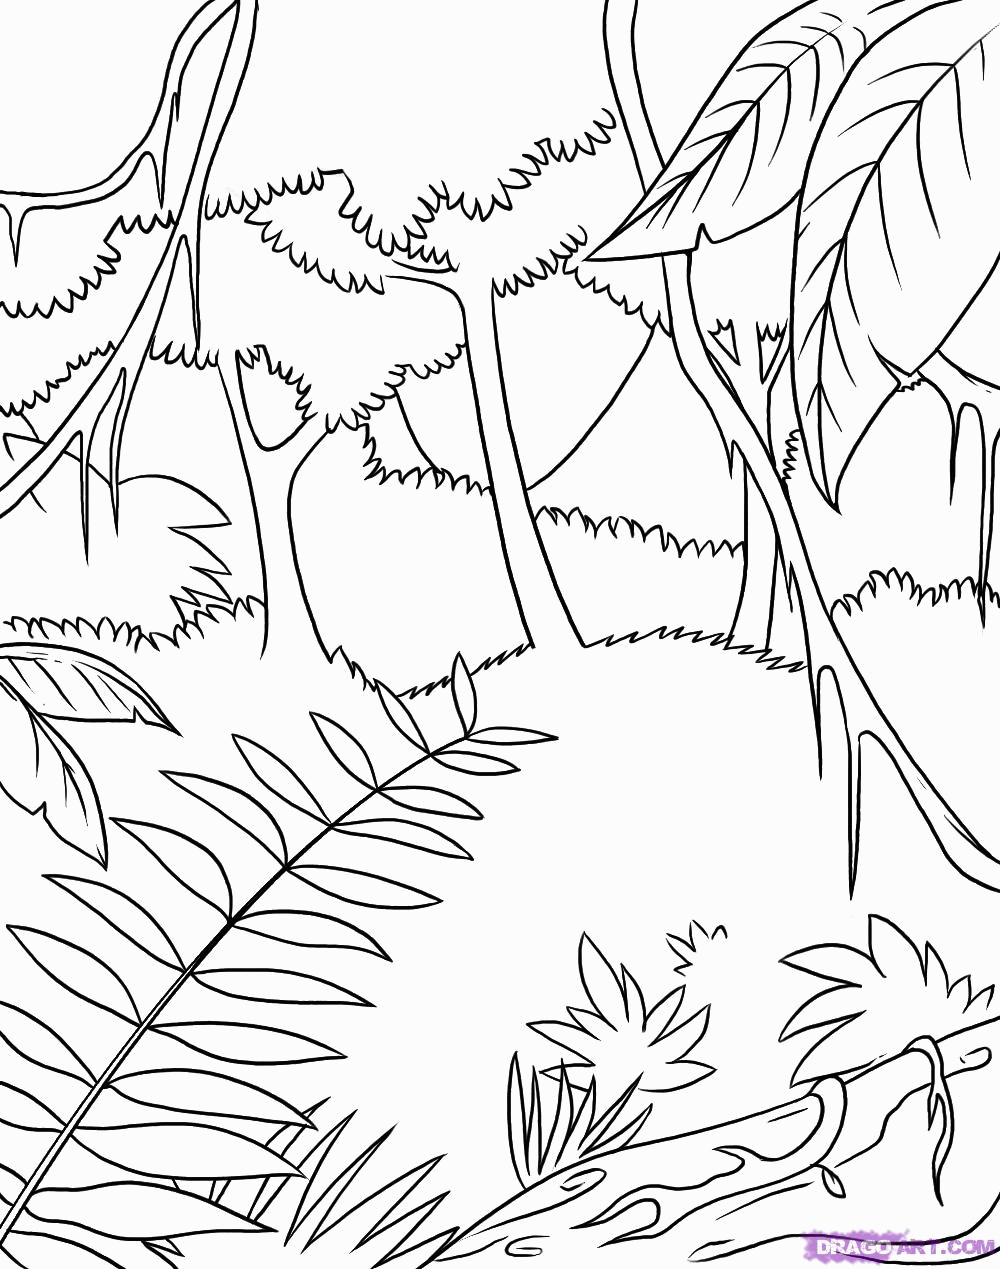 Coloring Pages Rainforest Trees - Coloring Page